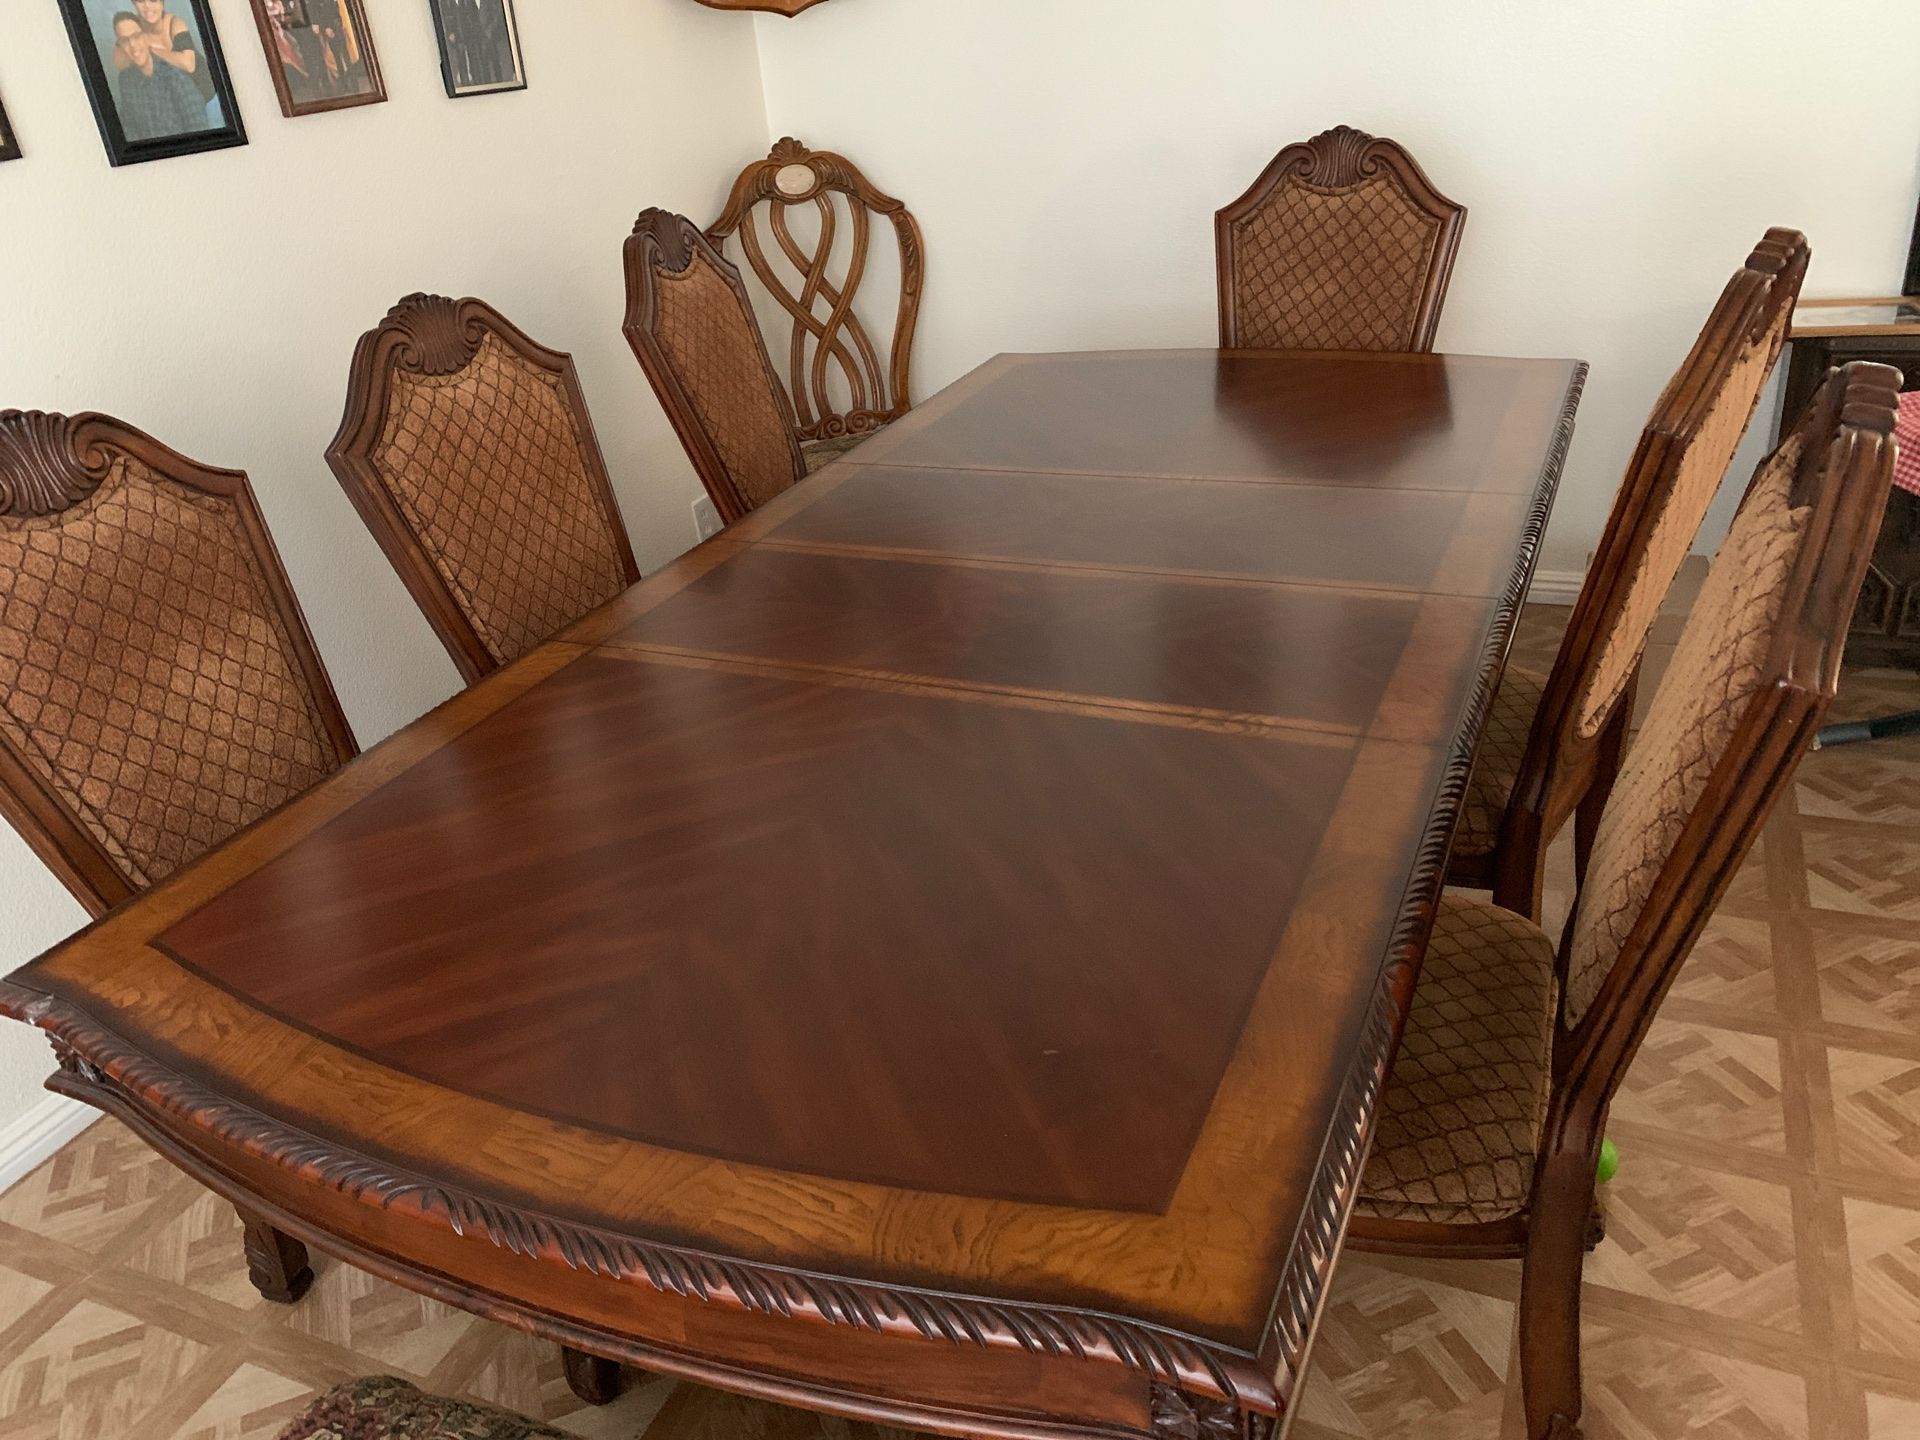 Kitchen table and china dining set.